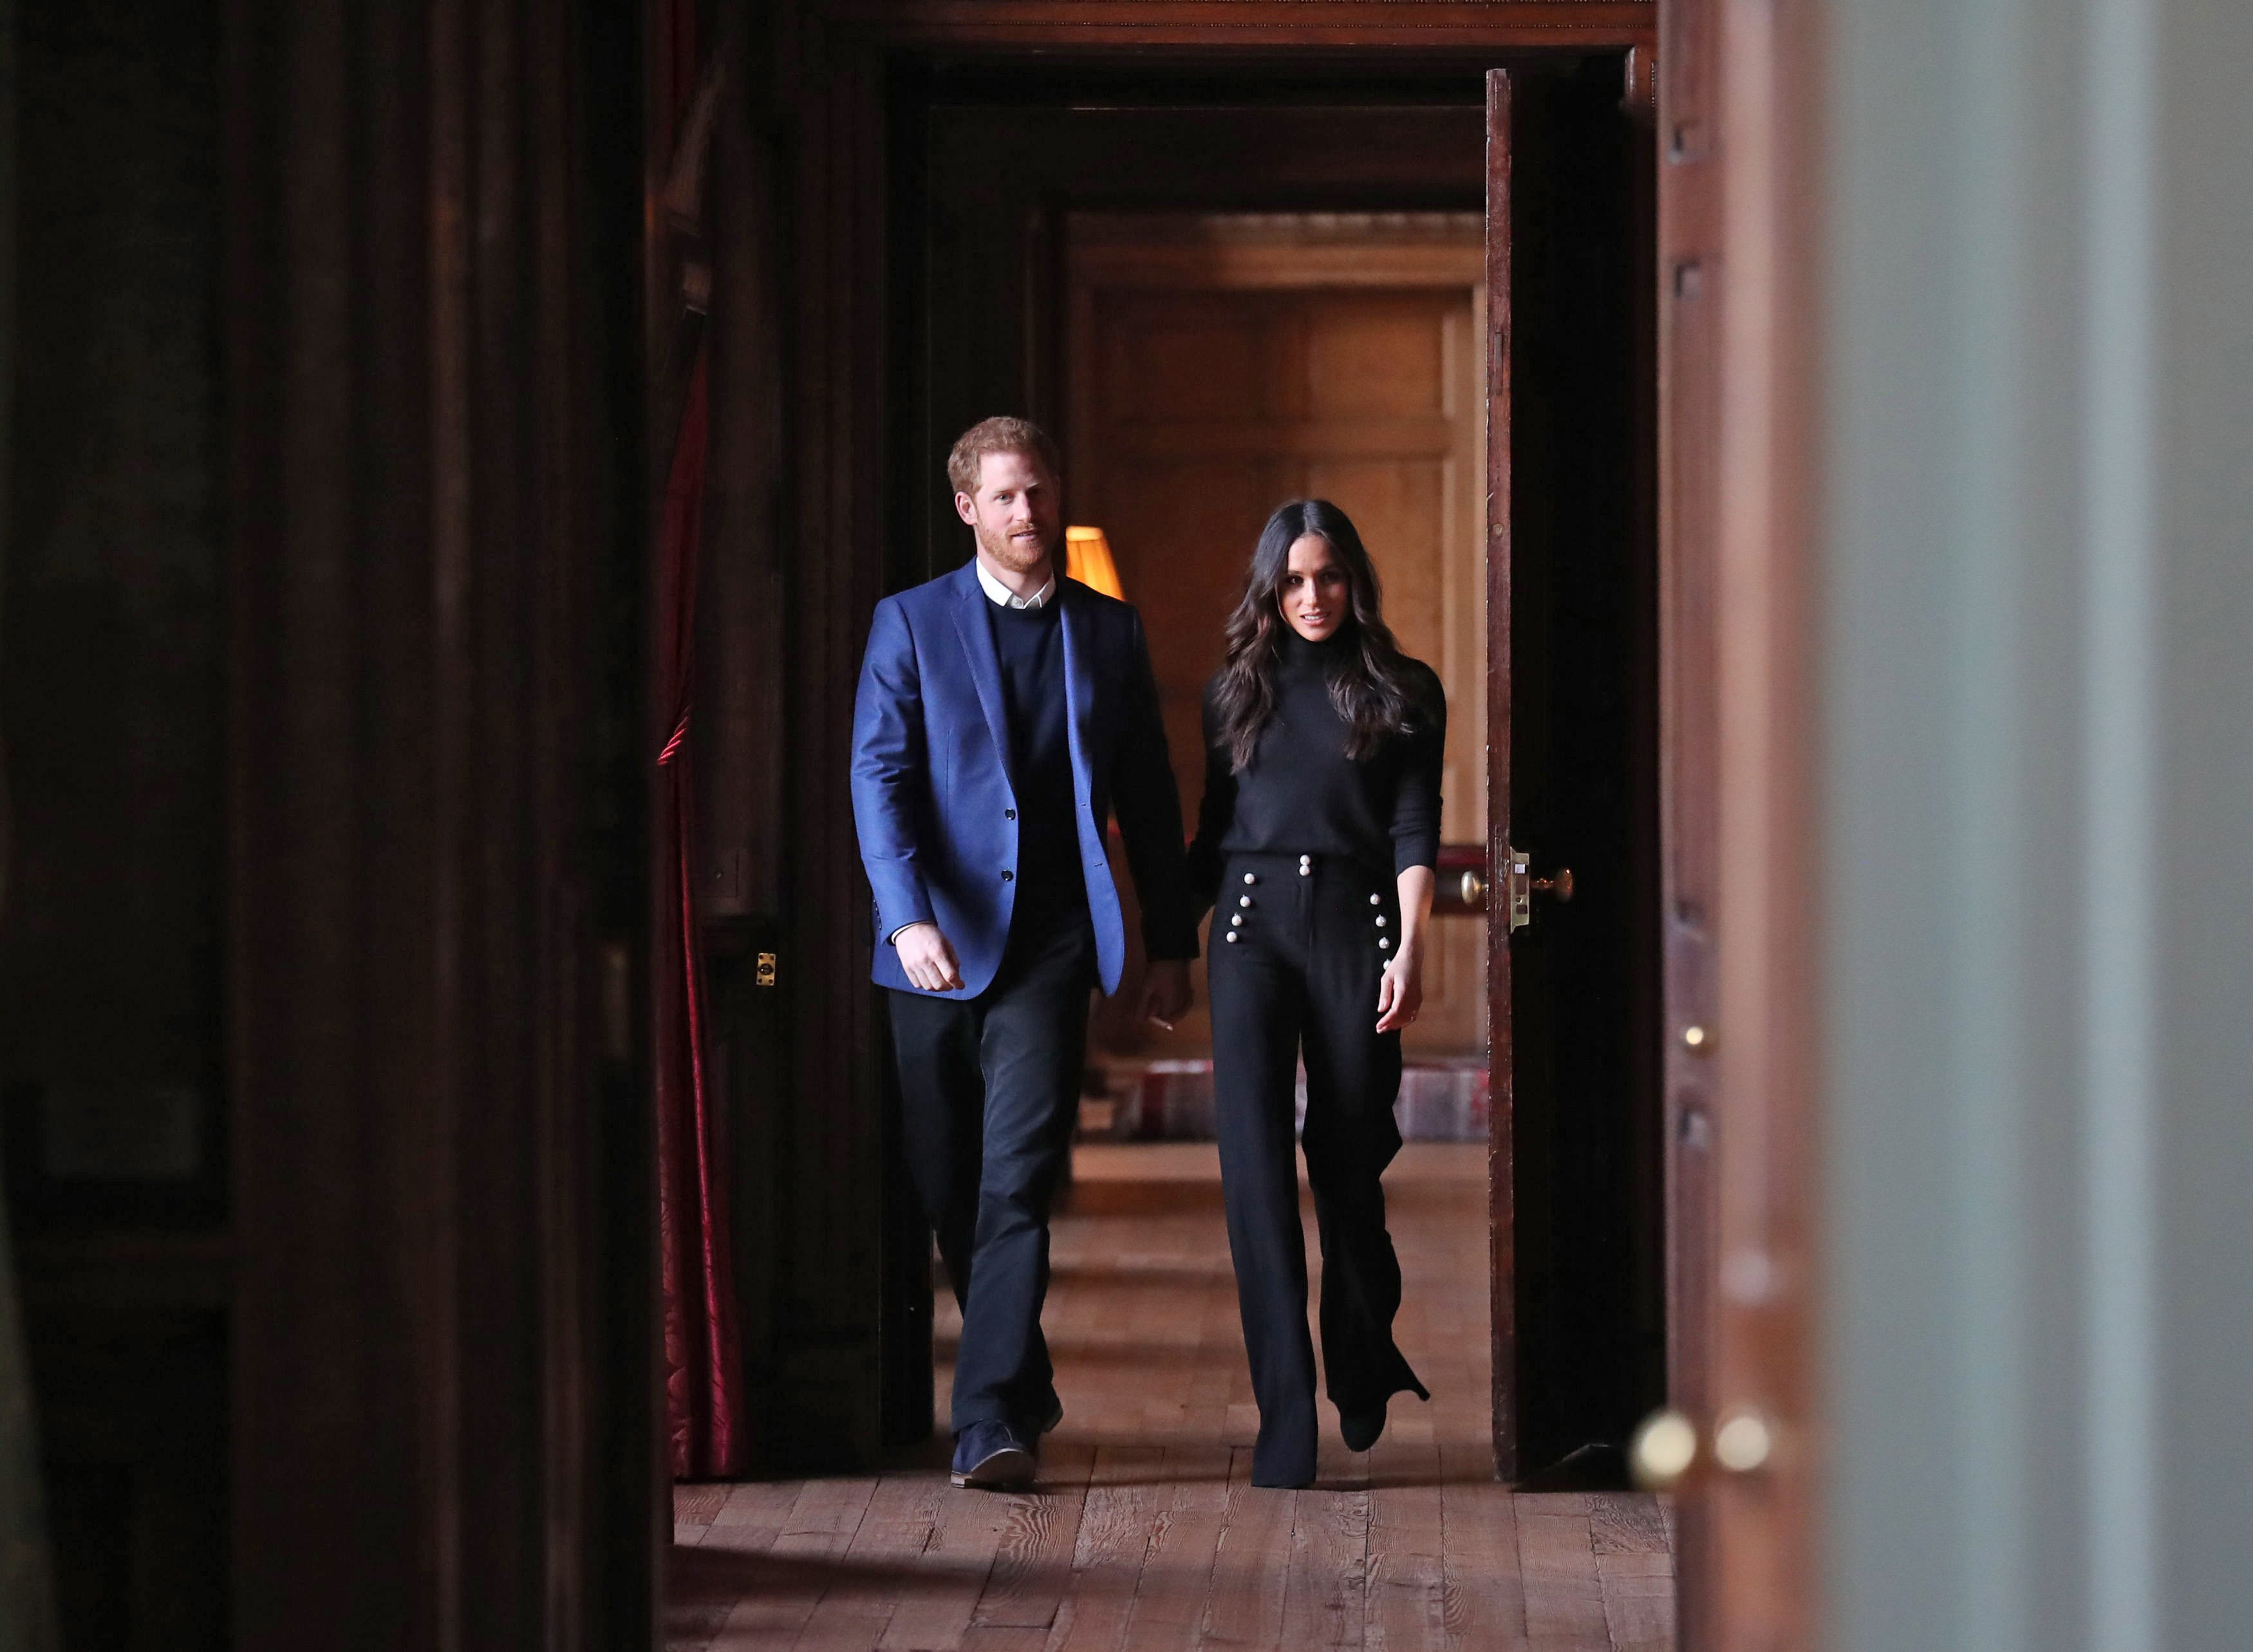 A body language expert analyzed a photo of Meghan Markle and Prince Harry who are seen here walking together through the corridors of the Palace of Holyroodhouse